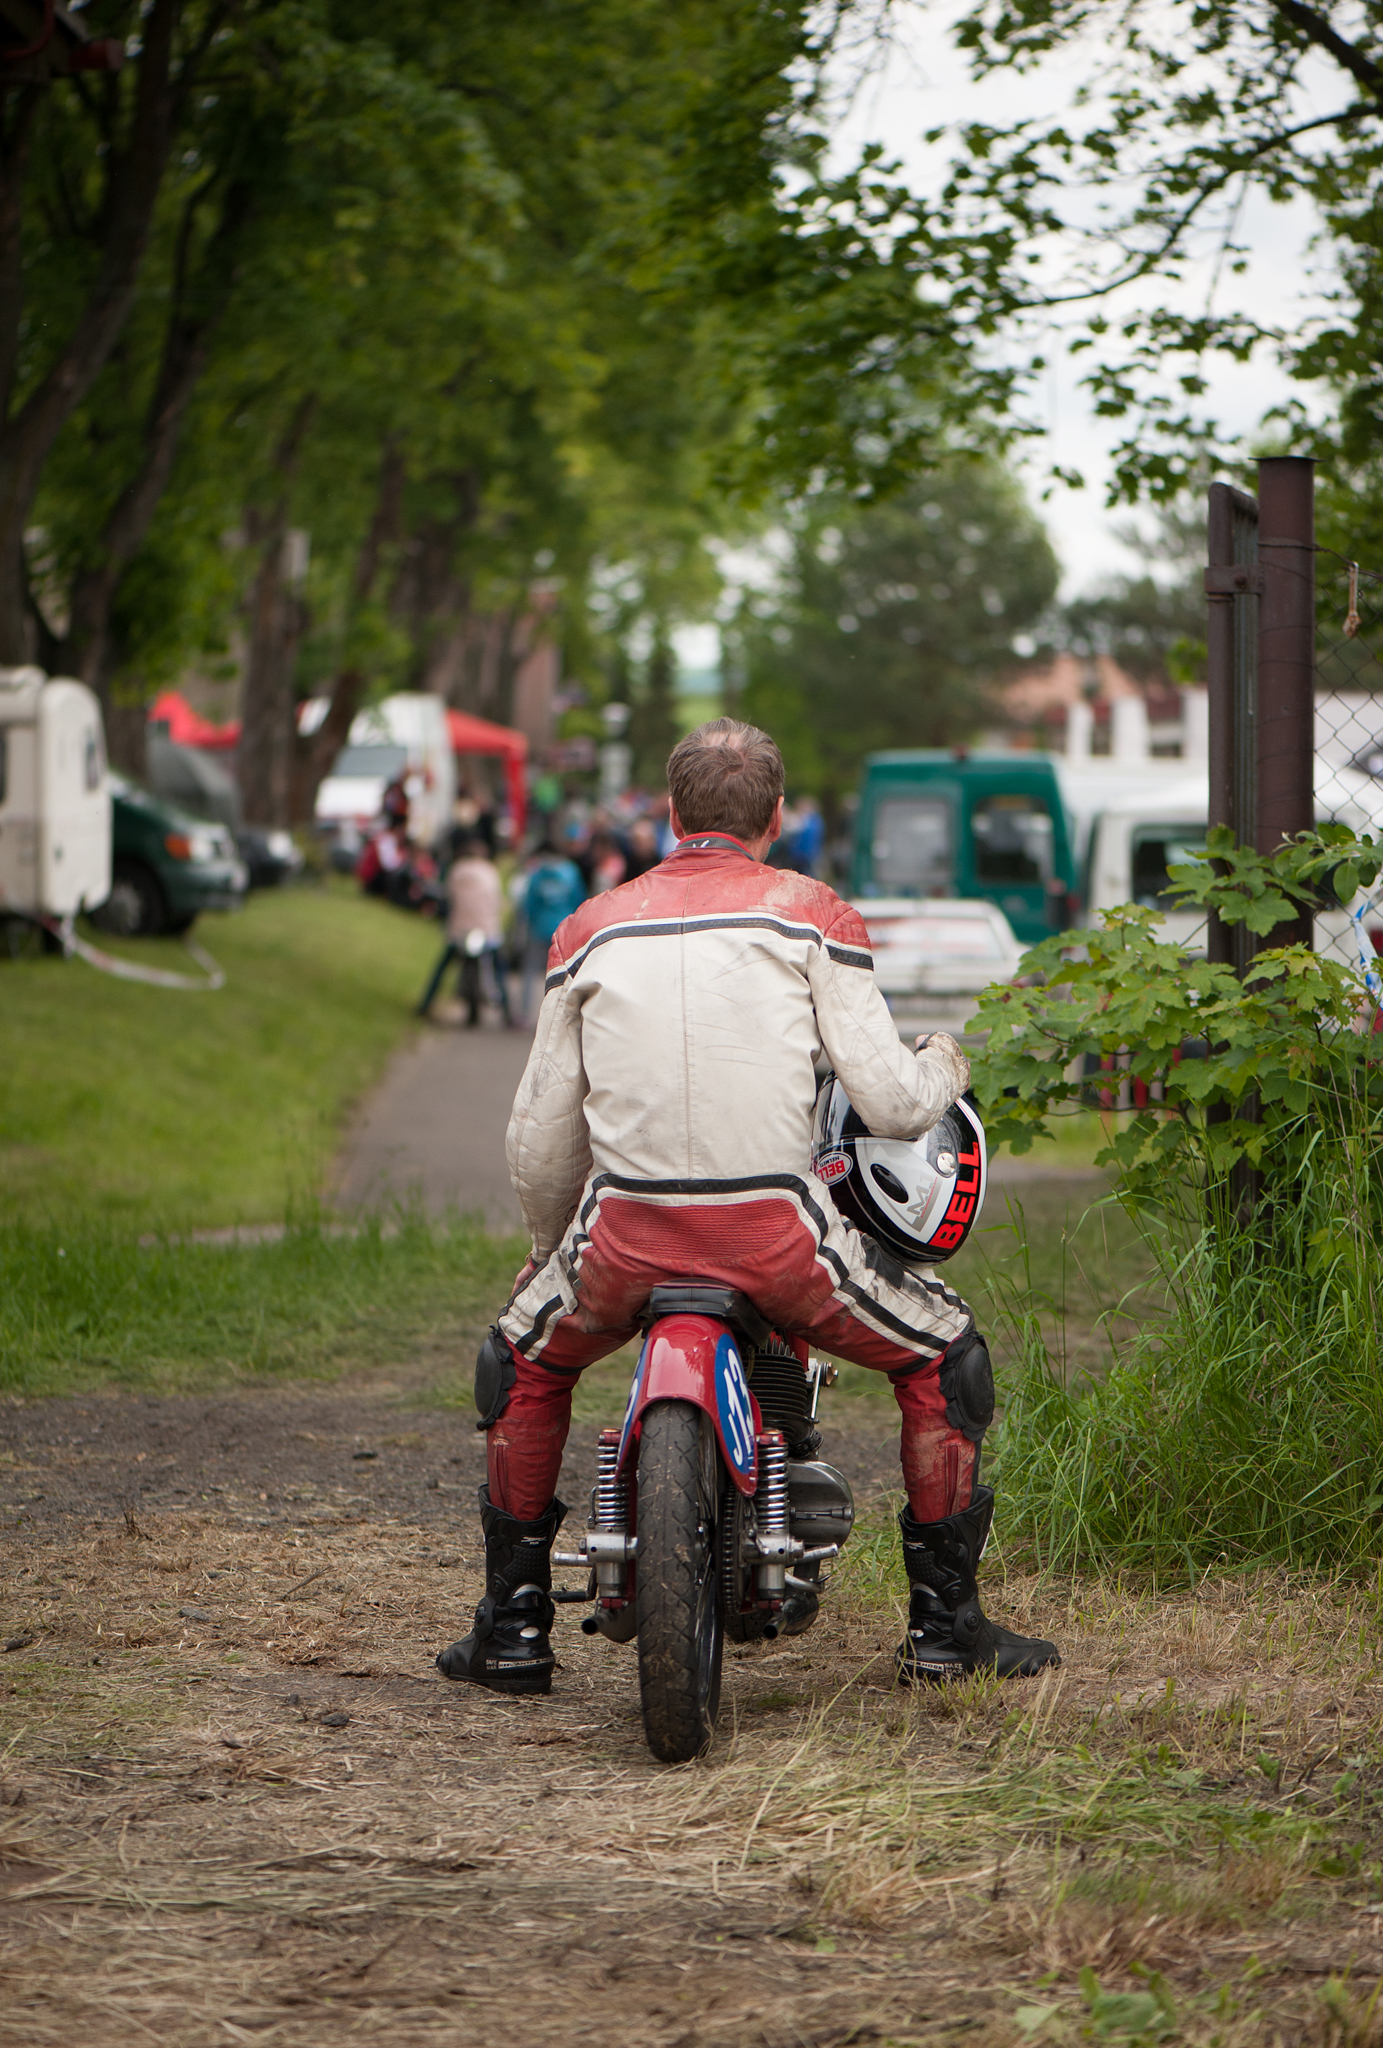 Biker. Concentration before start of the competition. Jicin I Czech Republic I 2015